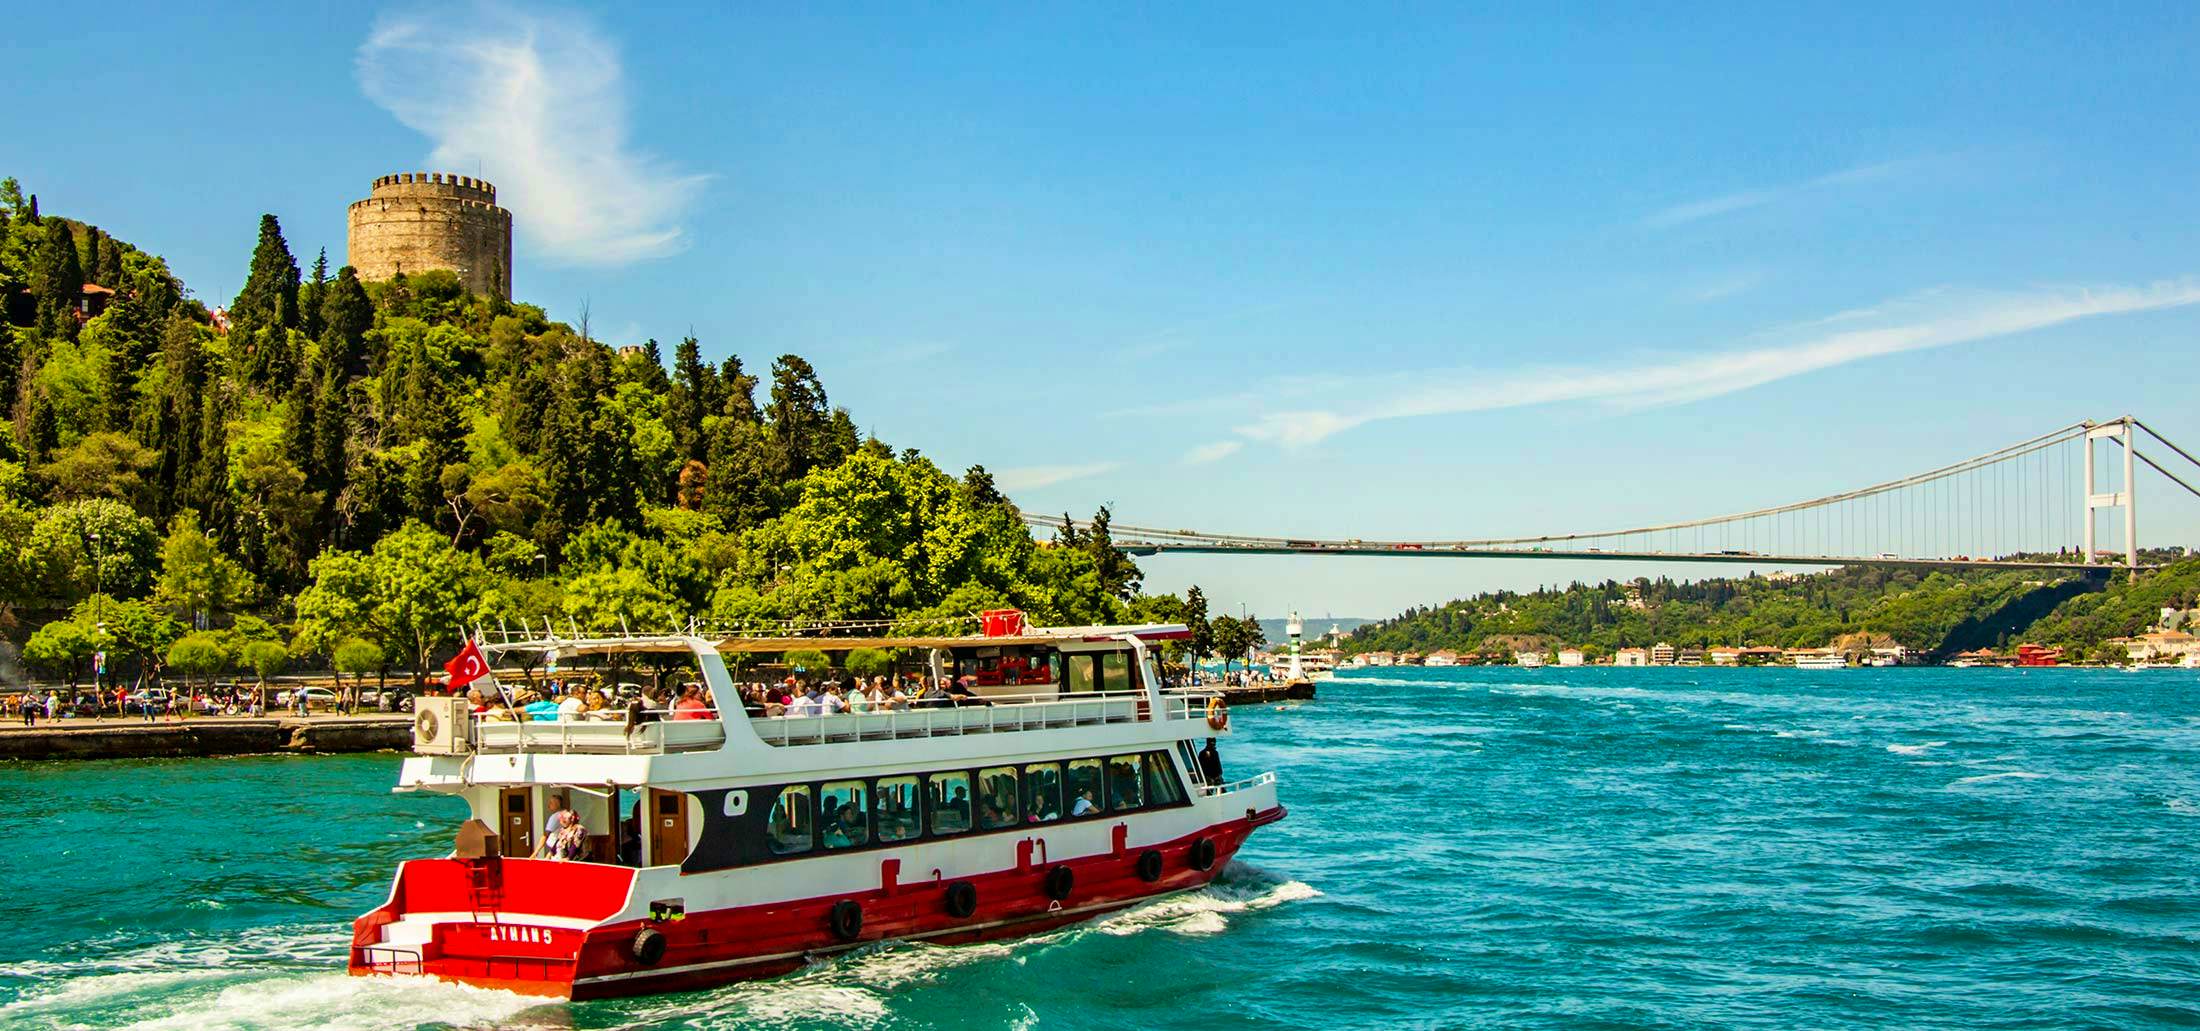 Evening Bosphorus Cruise with Dinner & Folkloric Show (unlimited alcoholic local drinks are included) with Shared Transfers